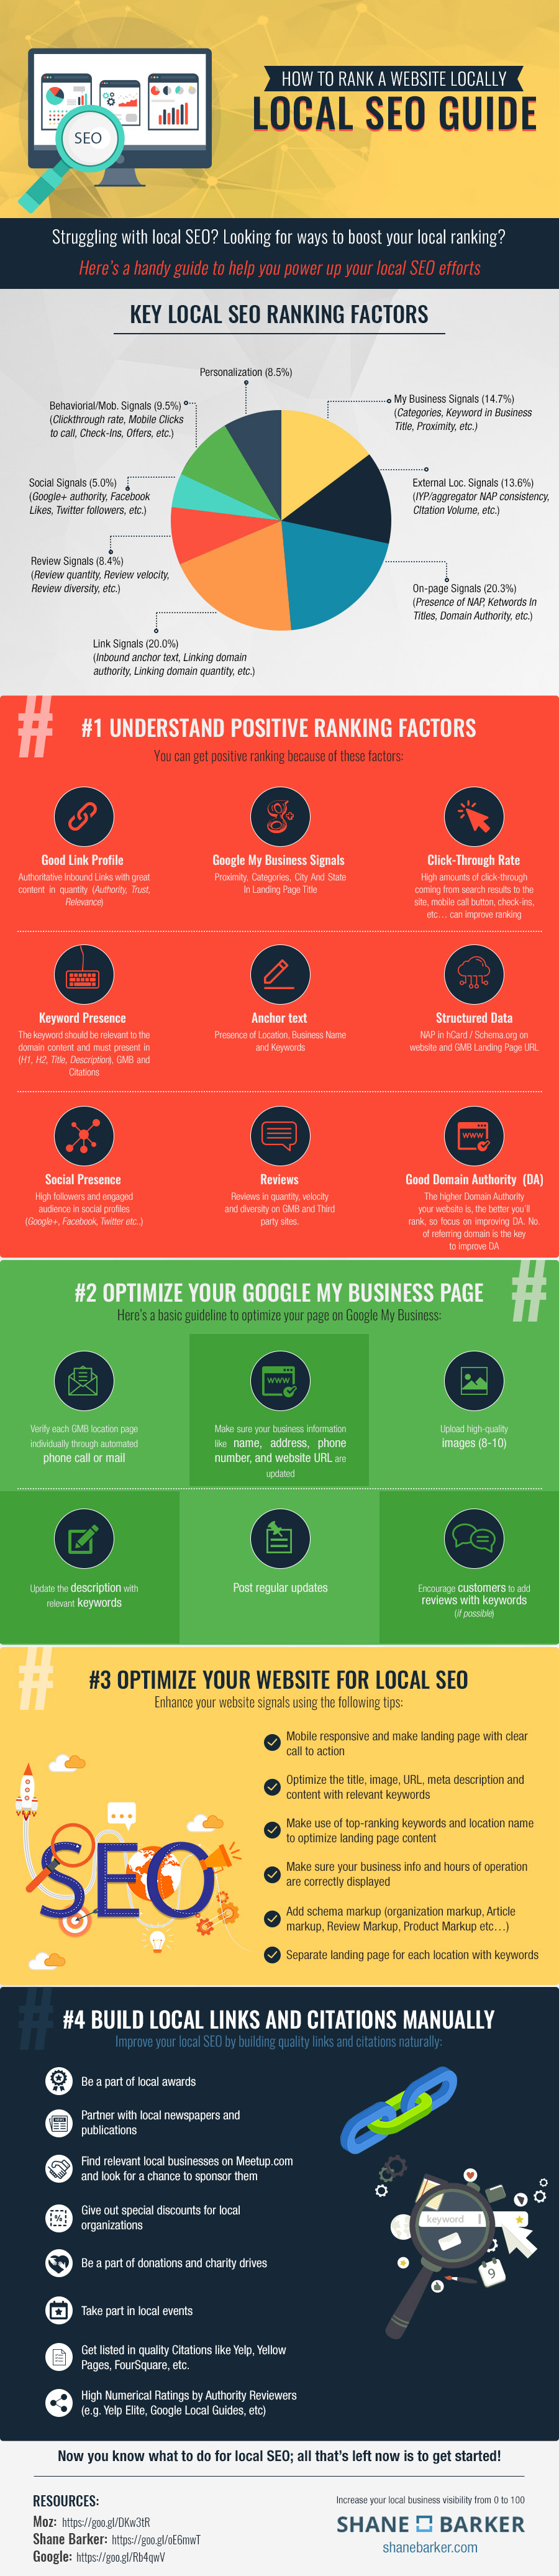 Local-SEO-Guide-Infographic